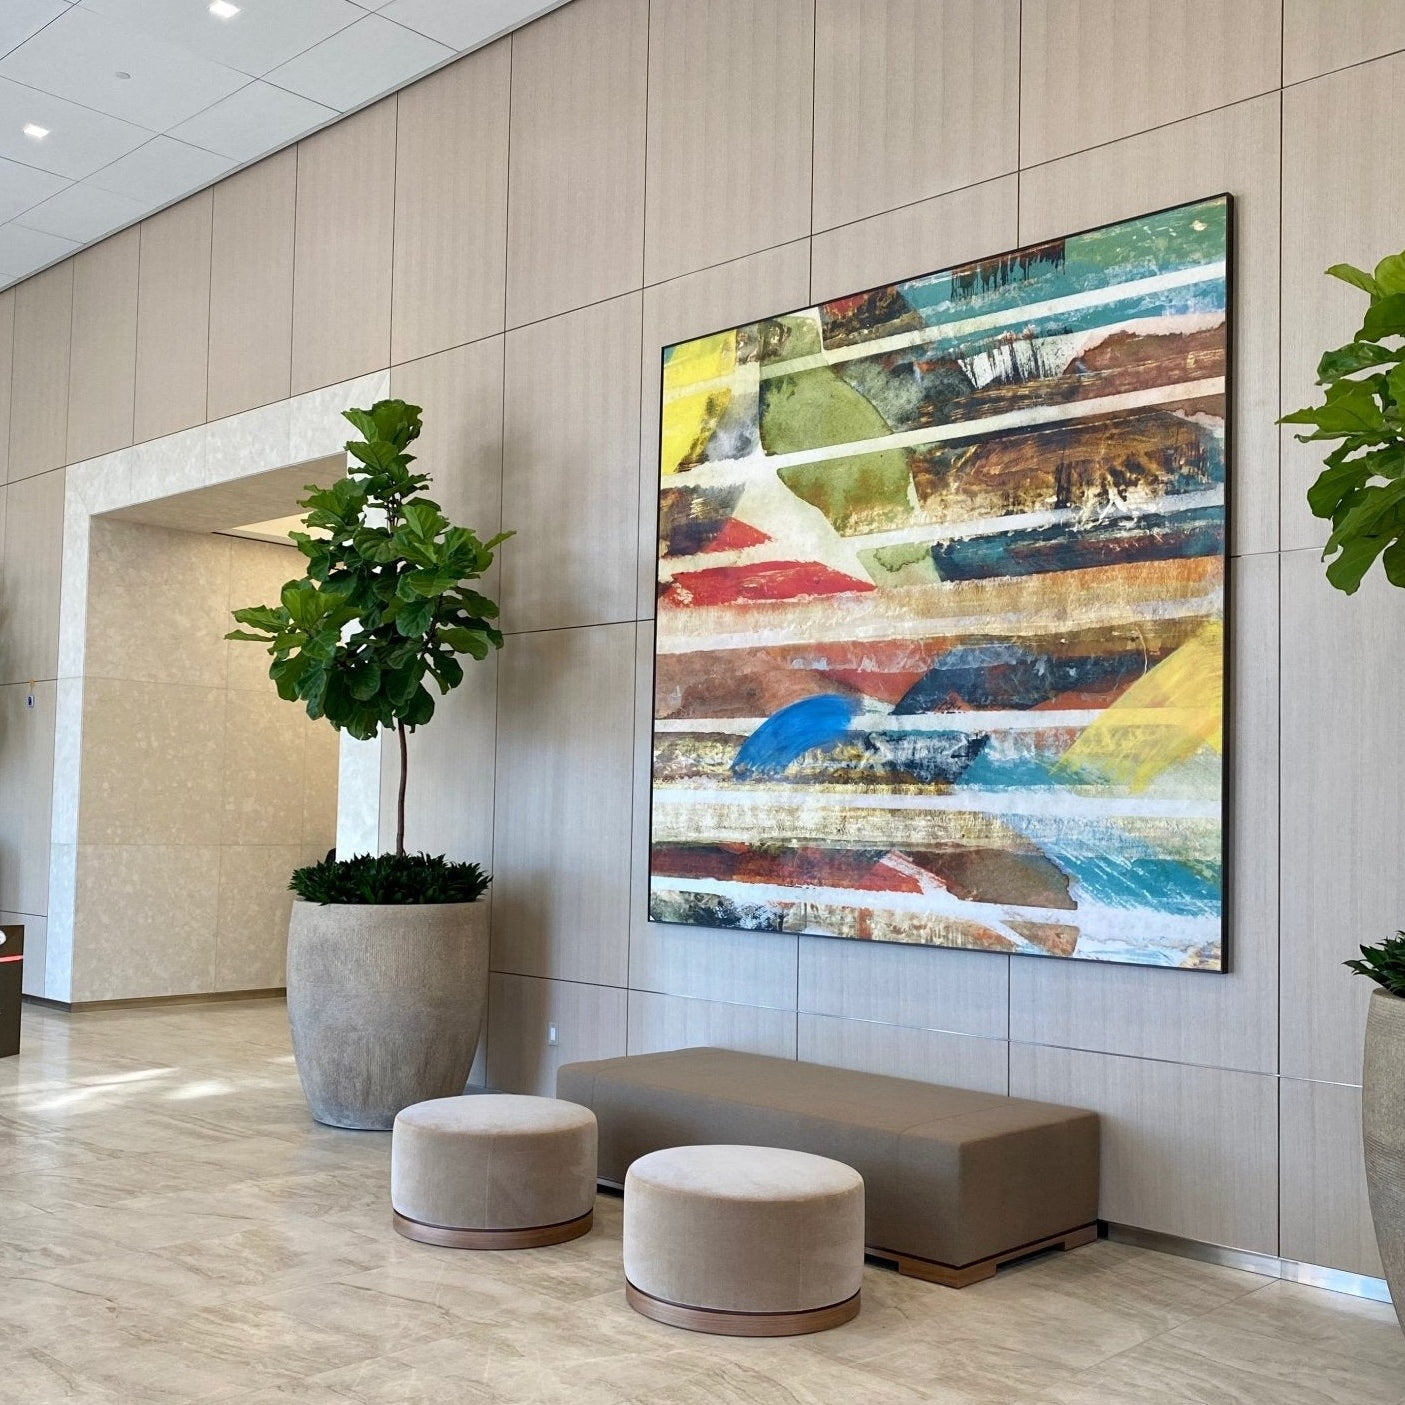 A modern lobby at Fox Plaza featuring artwork by Wrapped Studio, with a large abstract painting in vibrant stripes of red, blue, yellow, and other colors dominating the wall.